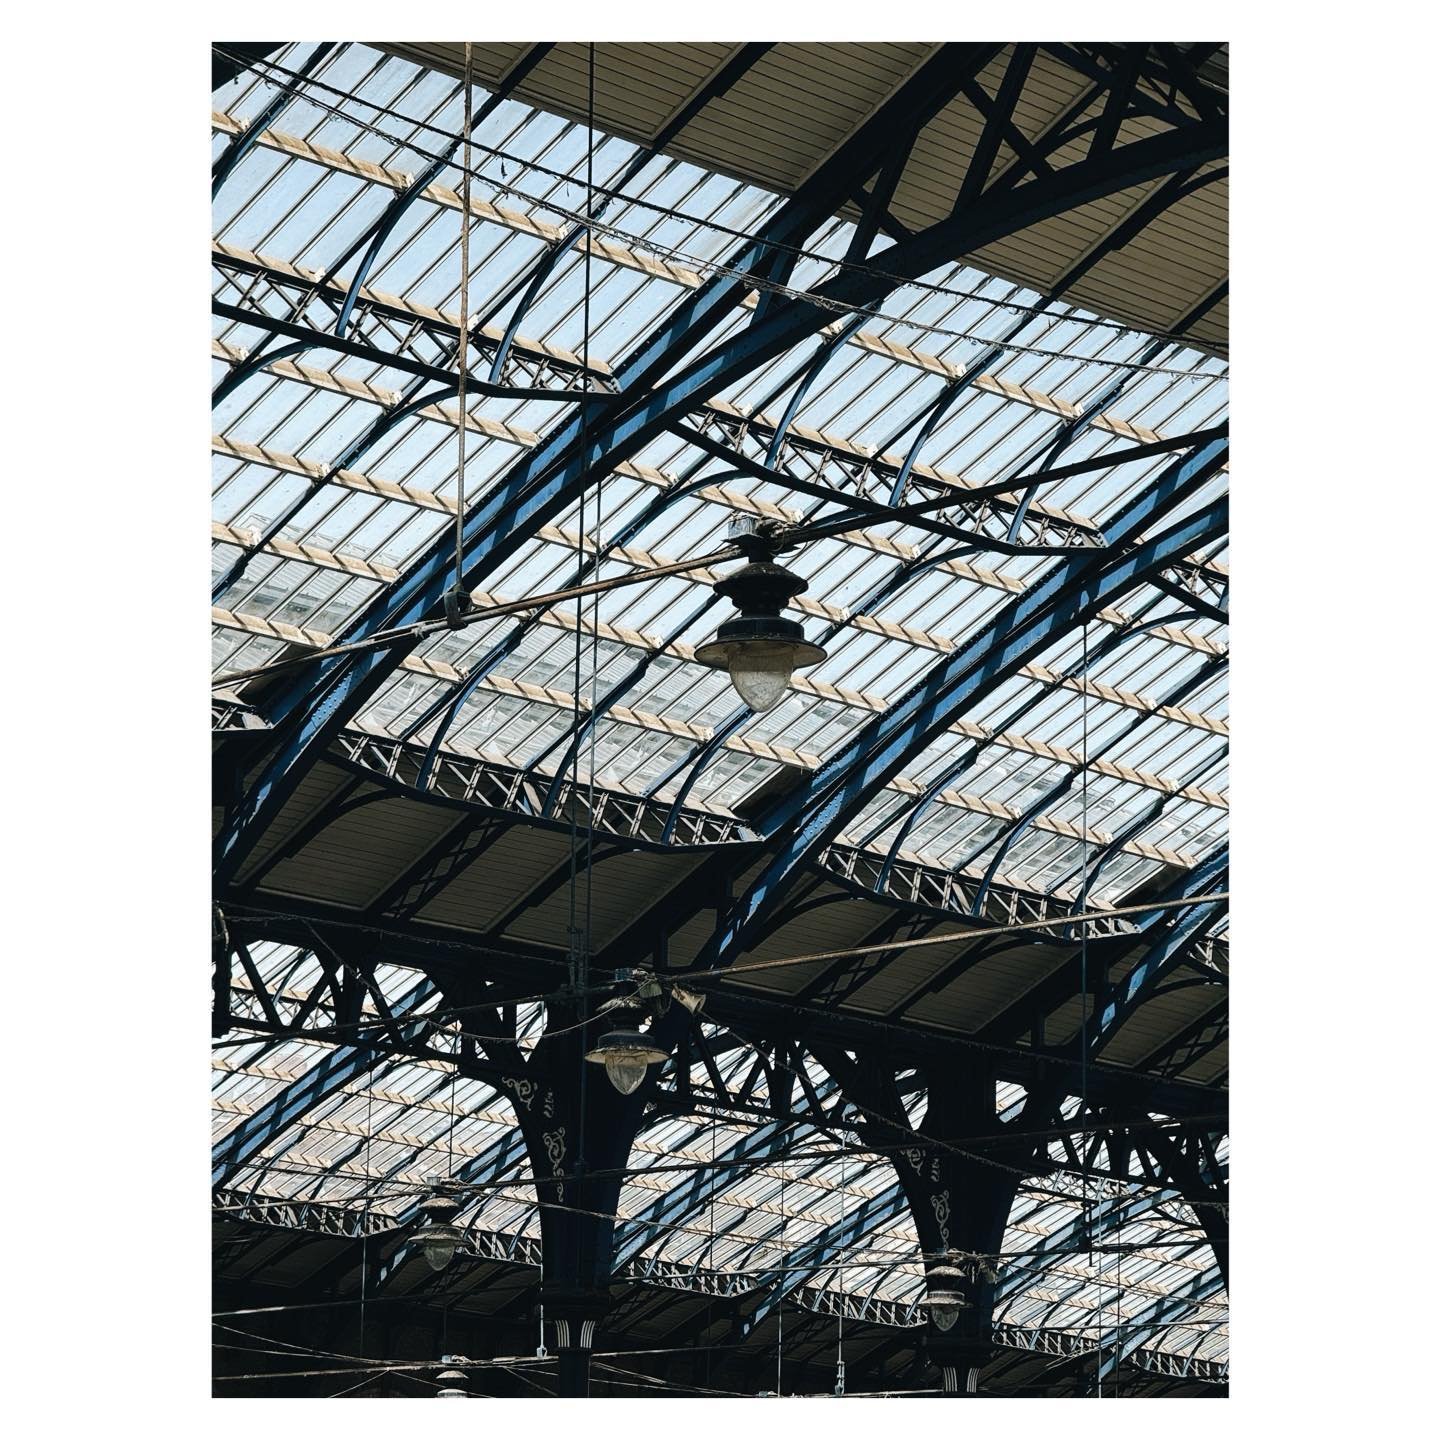 The beautiful roof of Brighton station

#architecture #travel